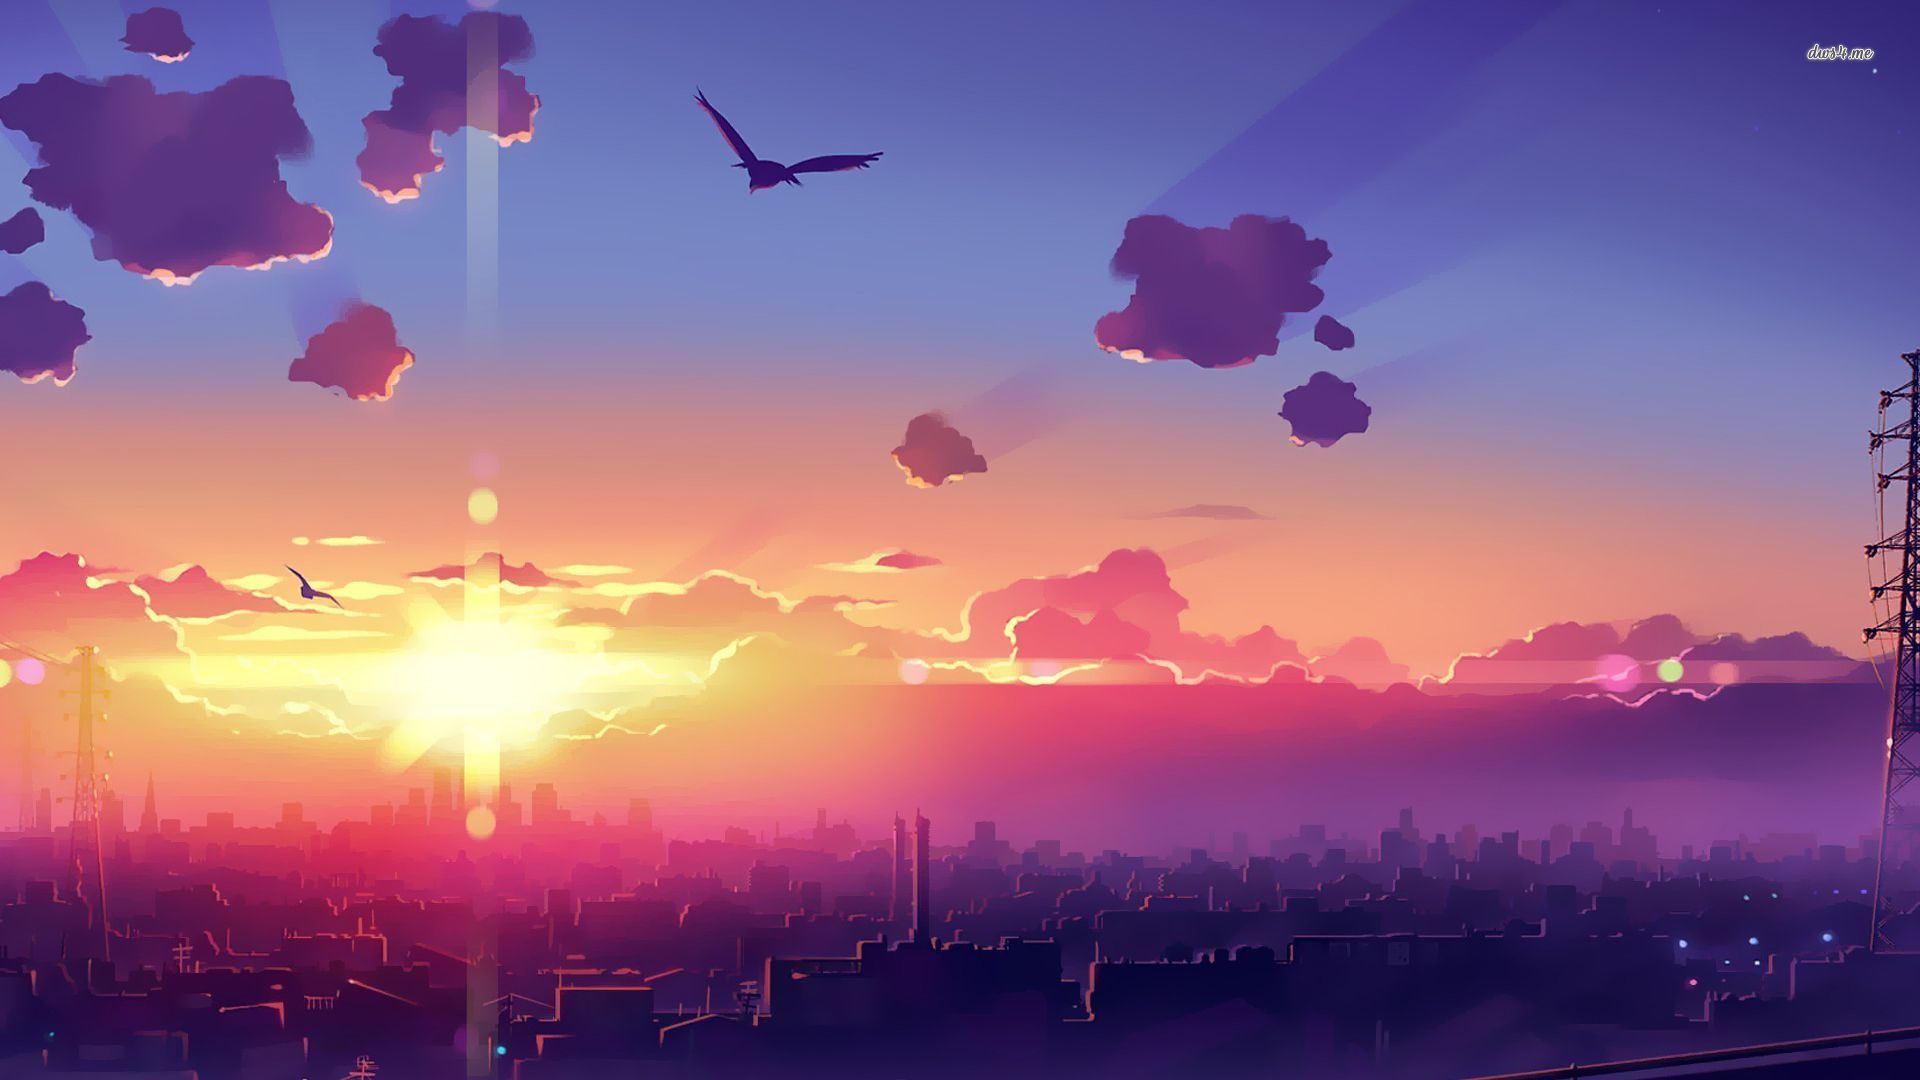 Amazing sunset above the city wallpaper - Anime wallpapers -